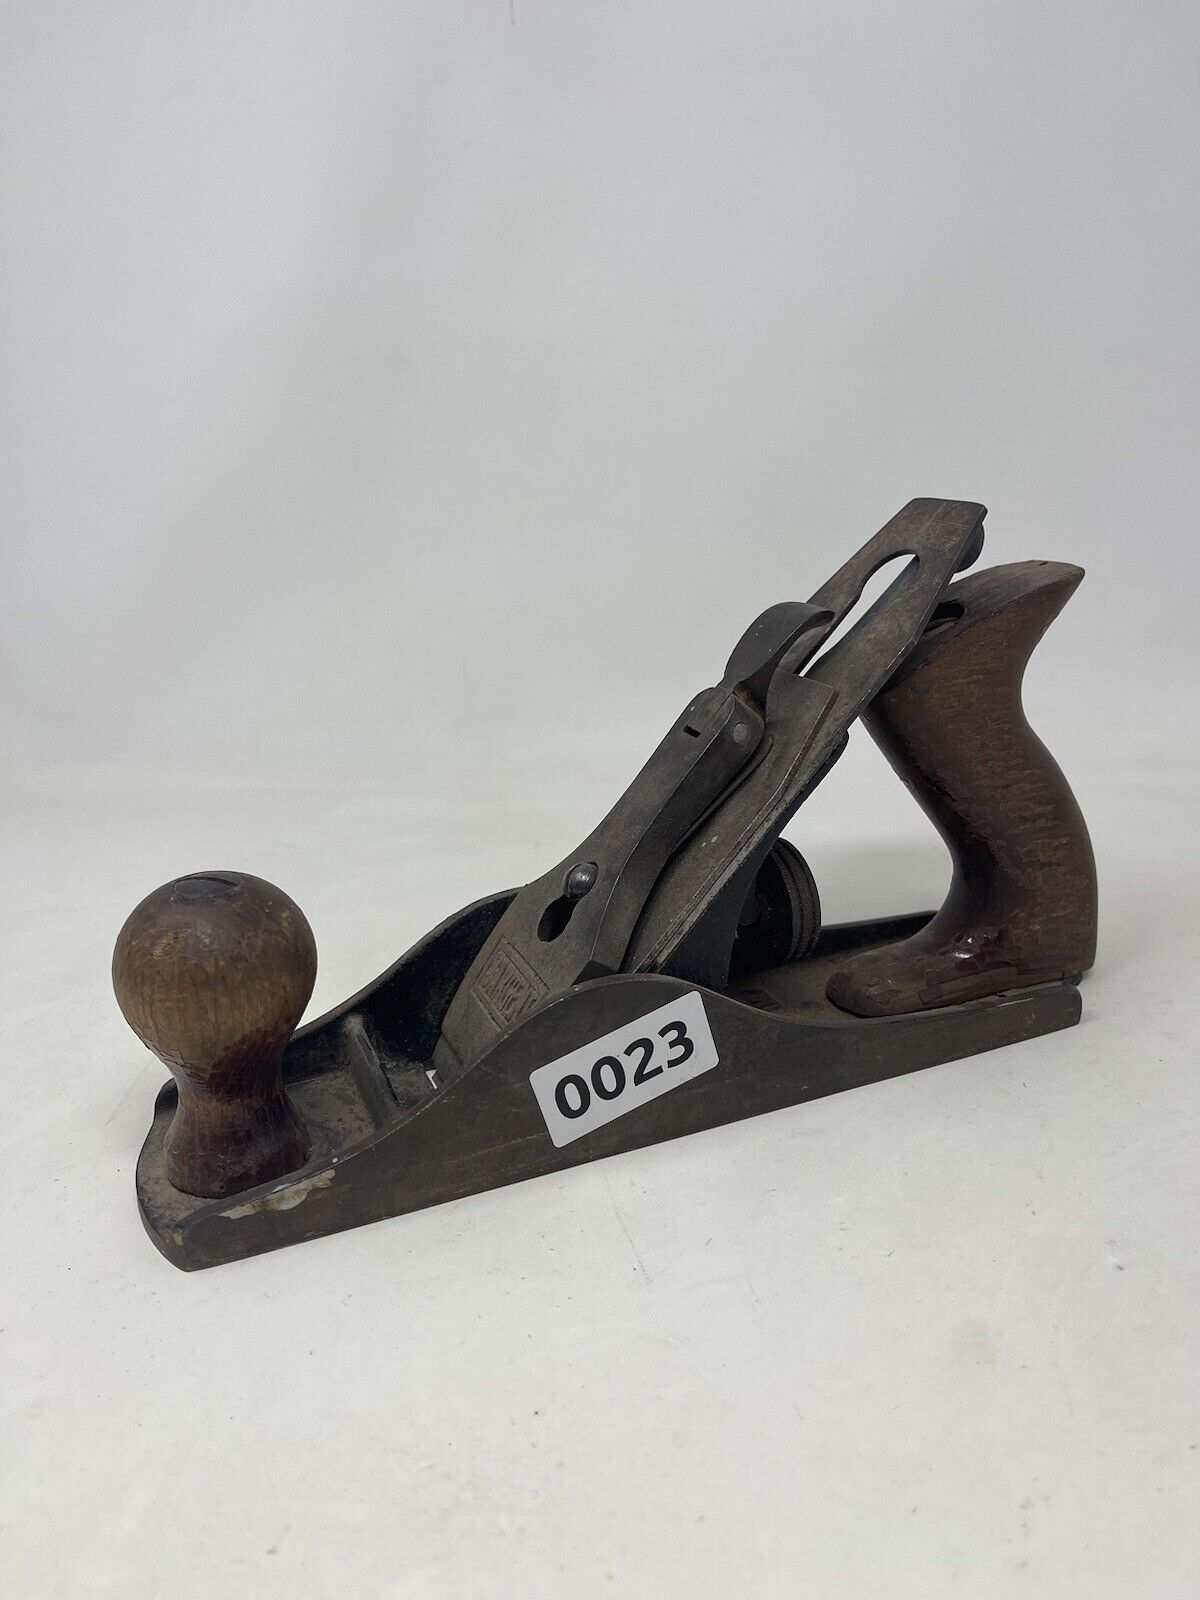 Vintage Ward's Lakeside Planer By Sargent No. 3 9